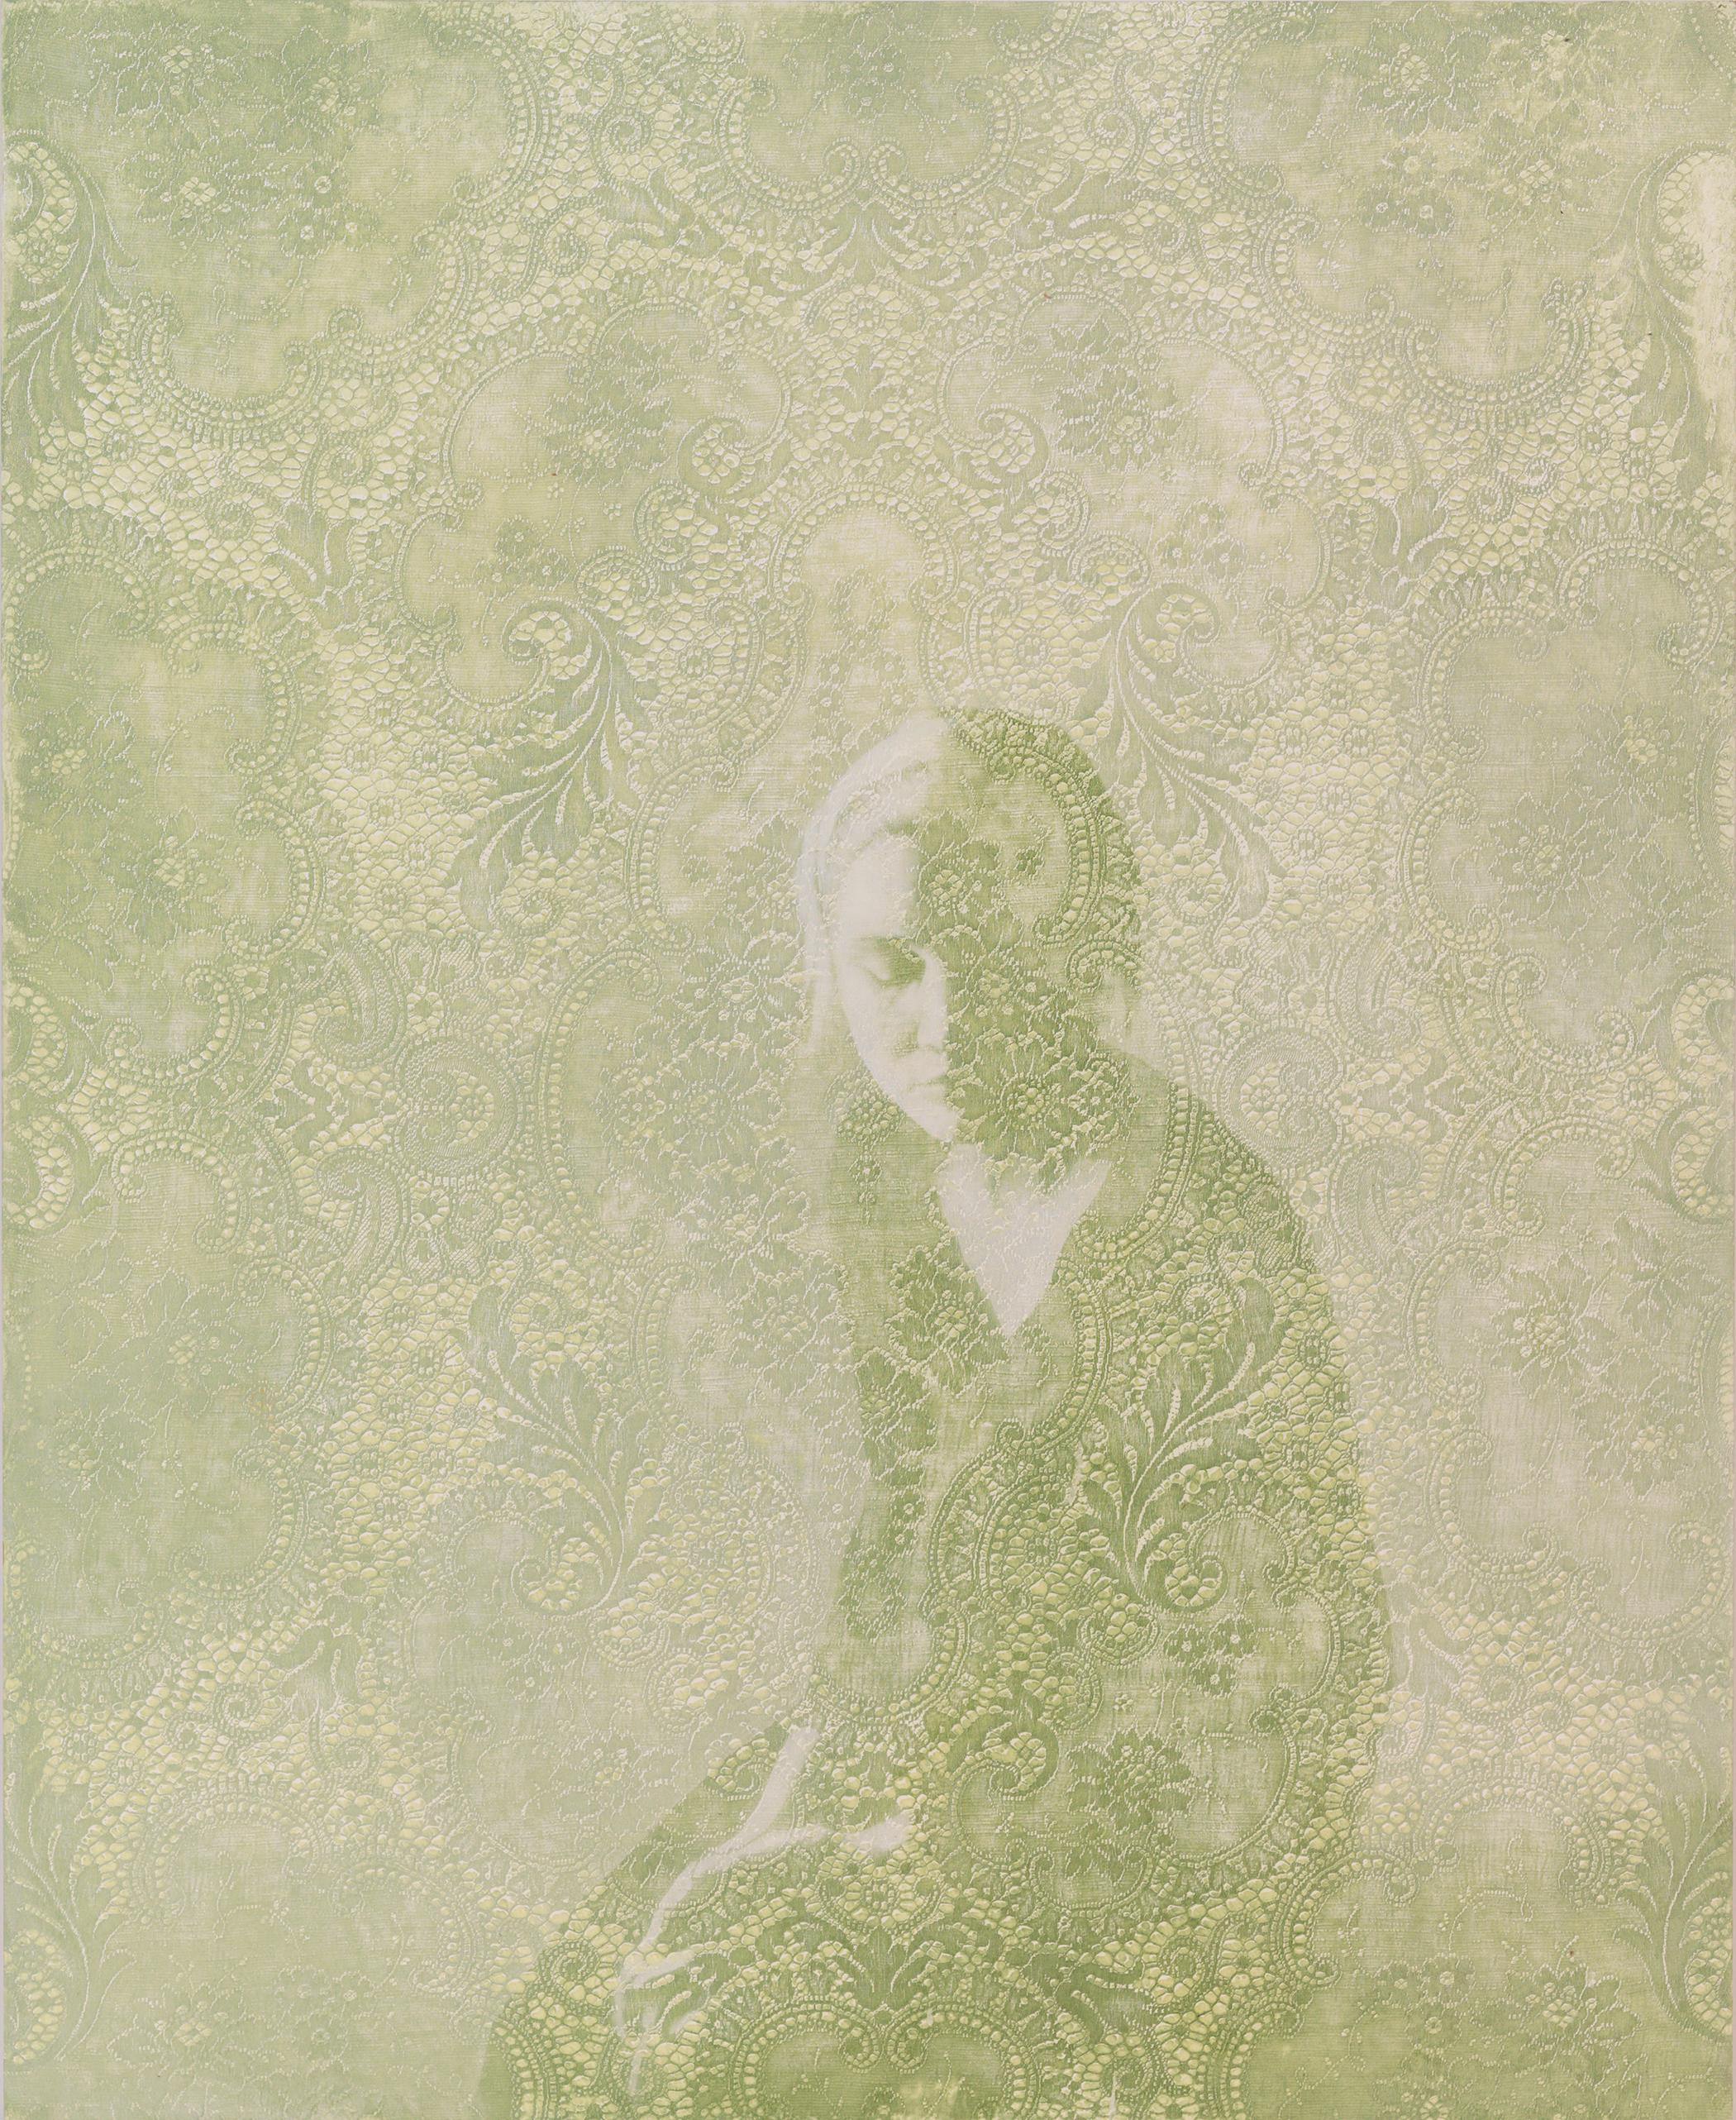 Susan Hall Figurative Painting - MEDITATION - light green painting of young woman with floral pattern